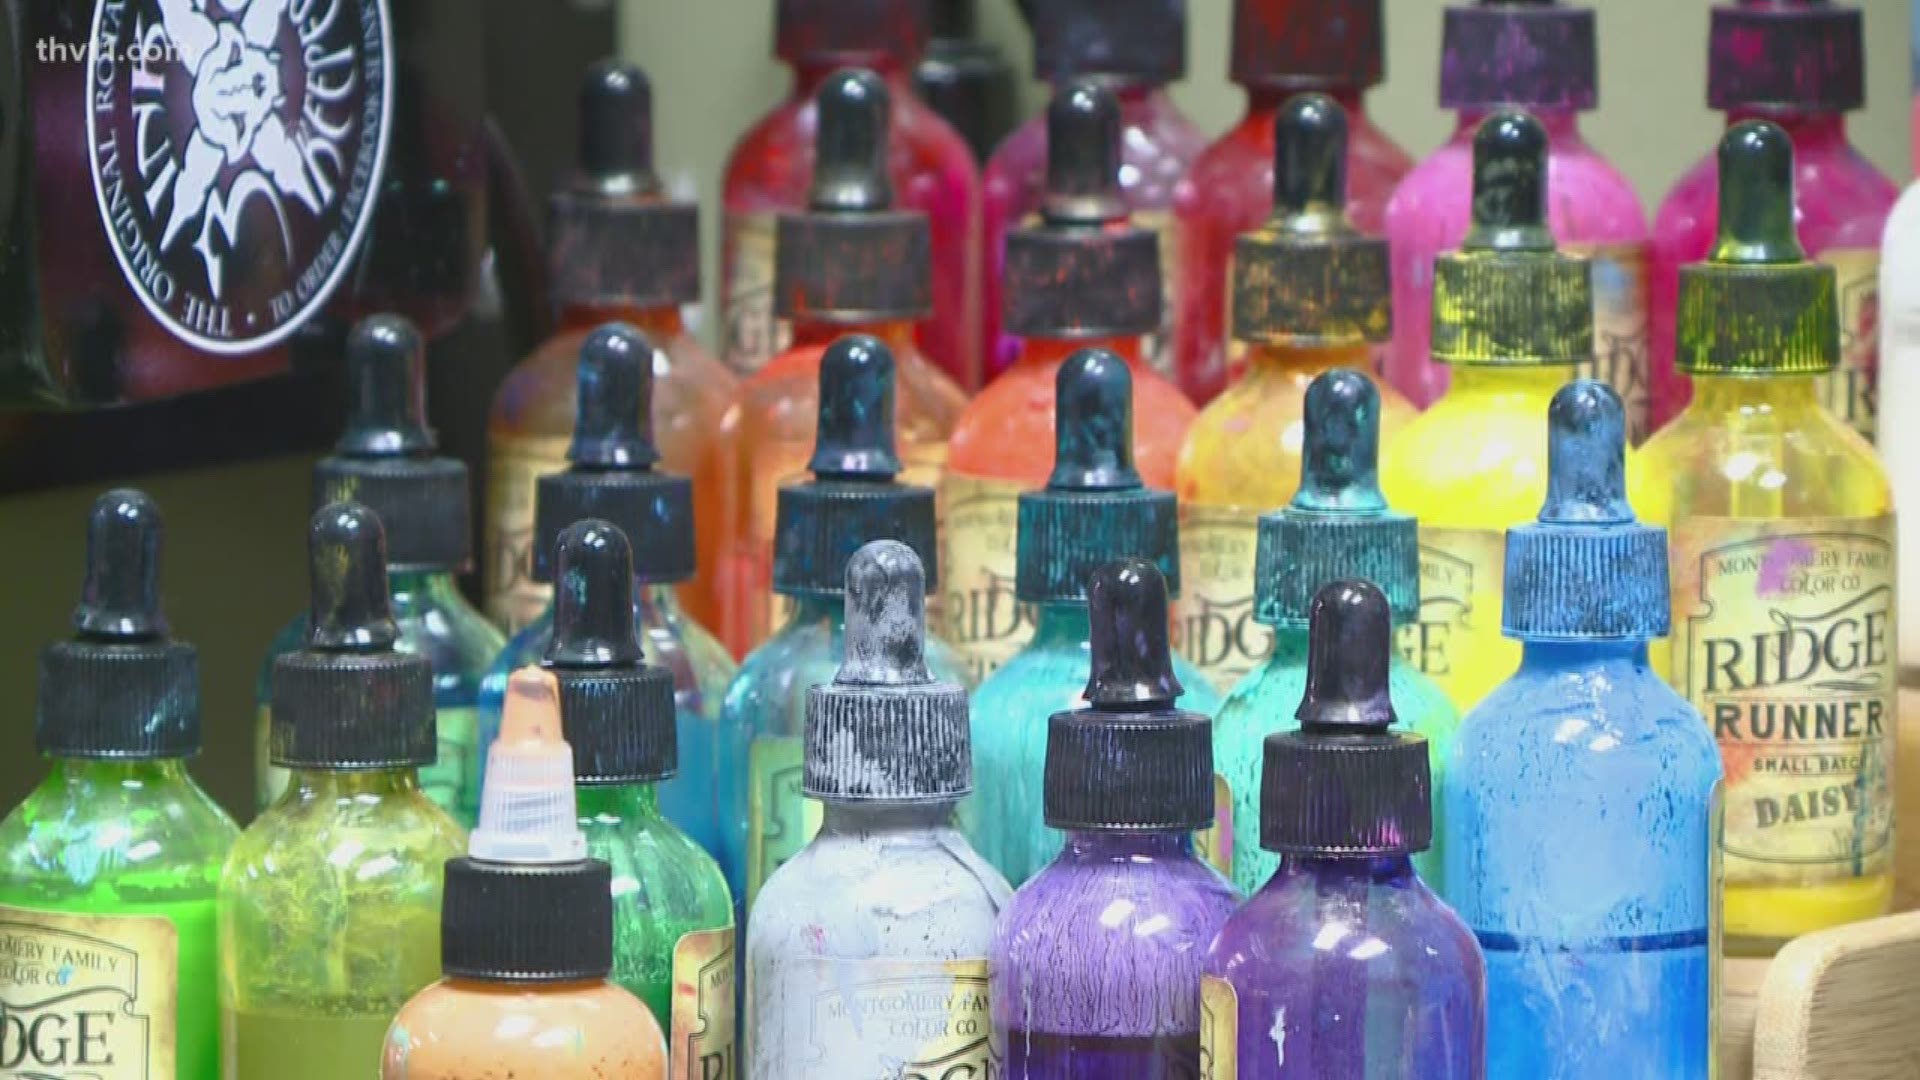 The FDA recalls six types of tattoo ink from major brands, saying it should not be used.